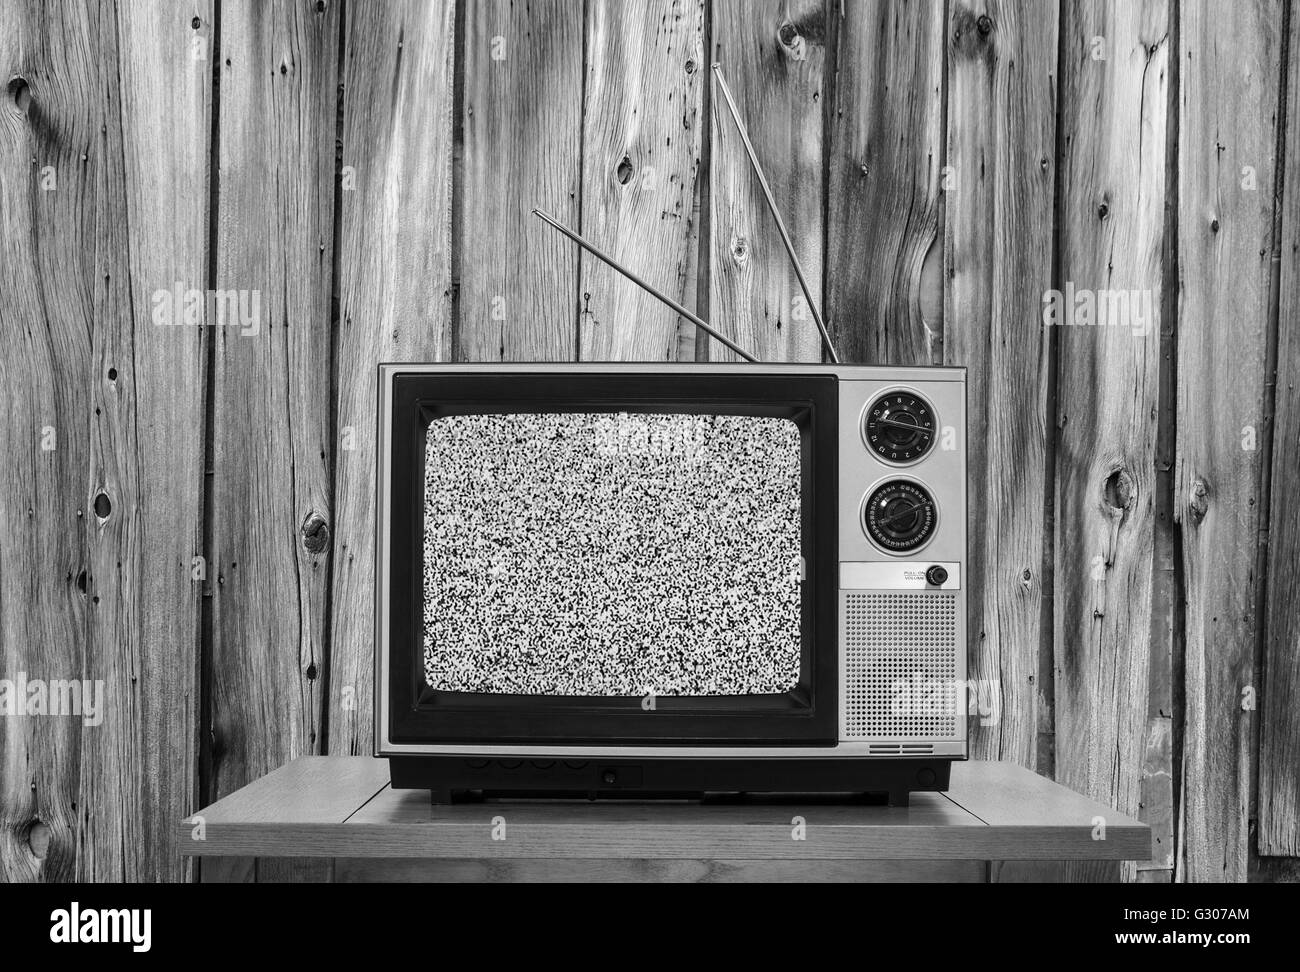 Vintage television with rustic wood wall and static screen in black and white. Stock Photo